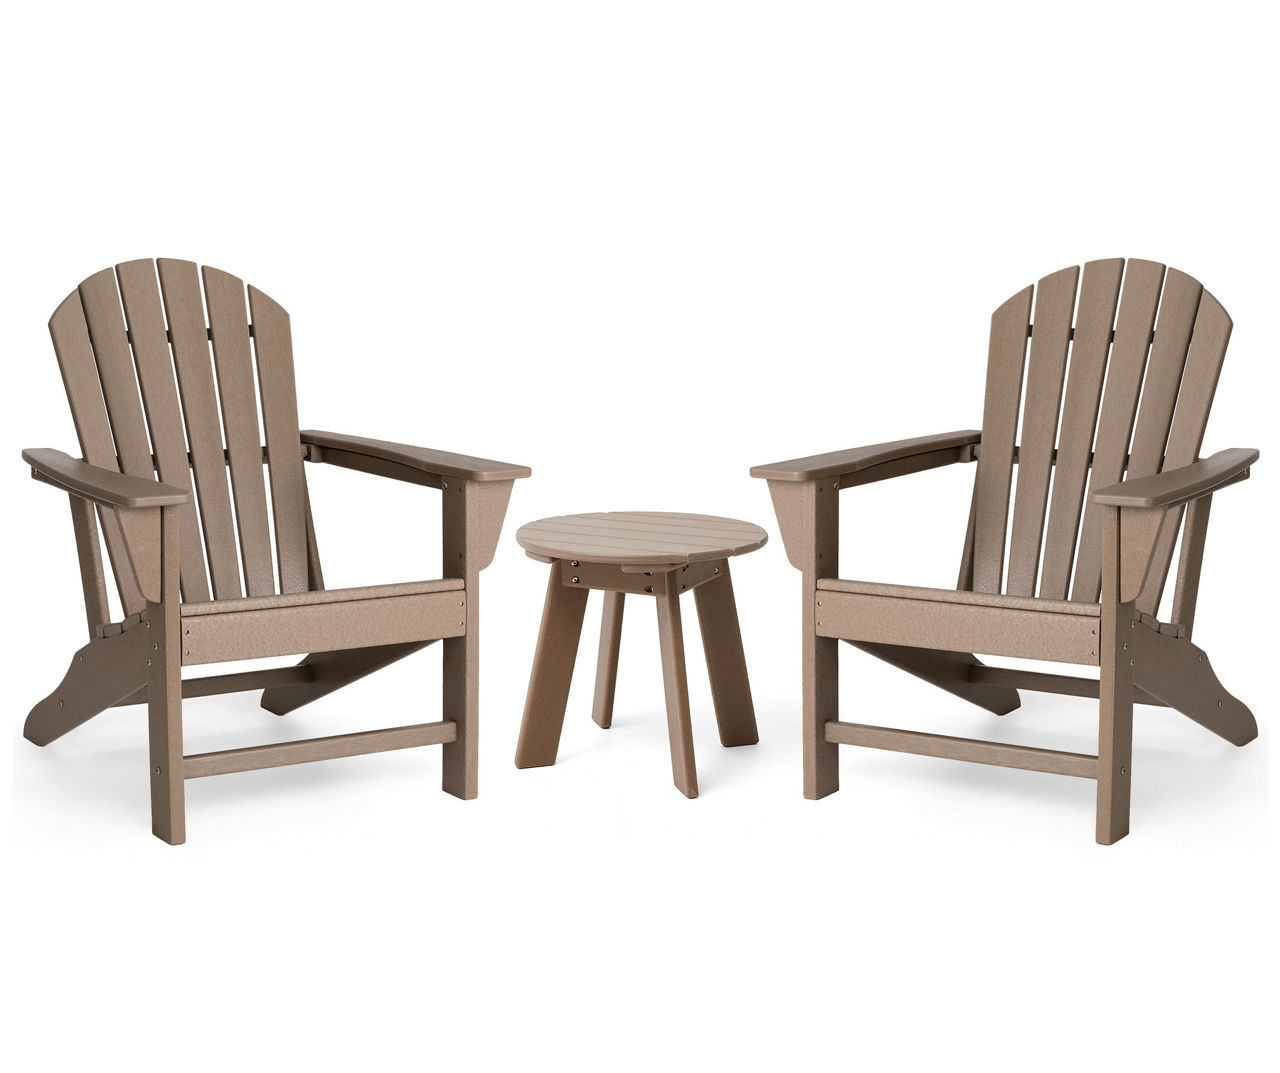 Tan 3-Piece Adirondack HDPE Outdoor Chair & Side Table Set